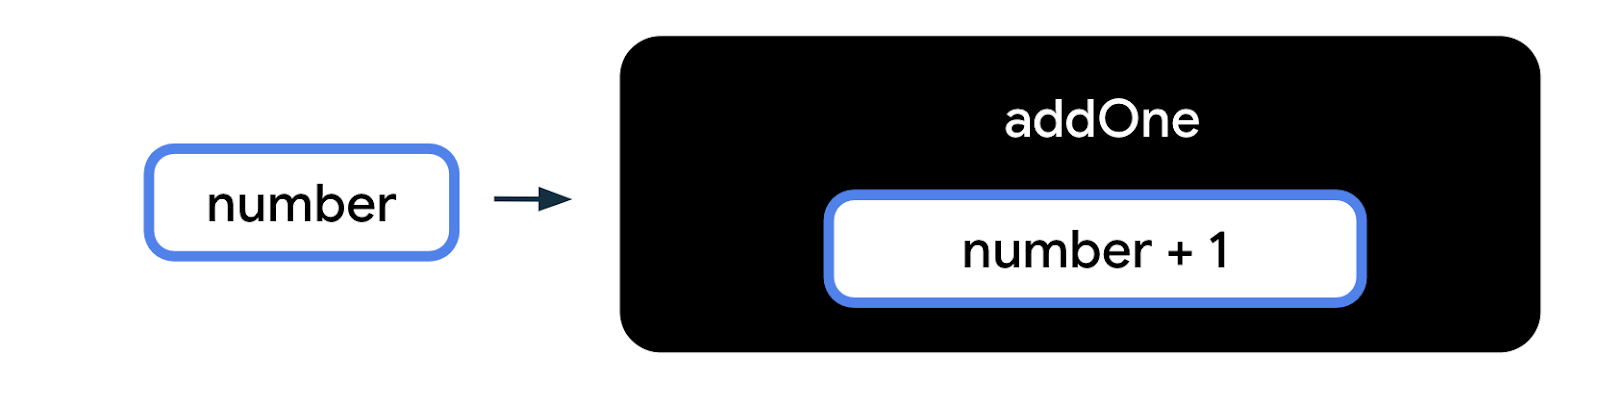 This diagram represents a function as a black box with the label "addOne" on it, which is the function name. Within the function box is a smaller box, representing the function body. Inside the function body box, there is text that says "number + 1". Outside the function black box, there is a box labeled "number" with an arrow pointing into the function black box. The number is an input to the function. 